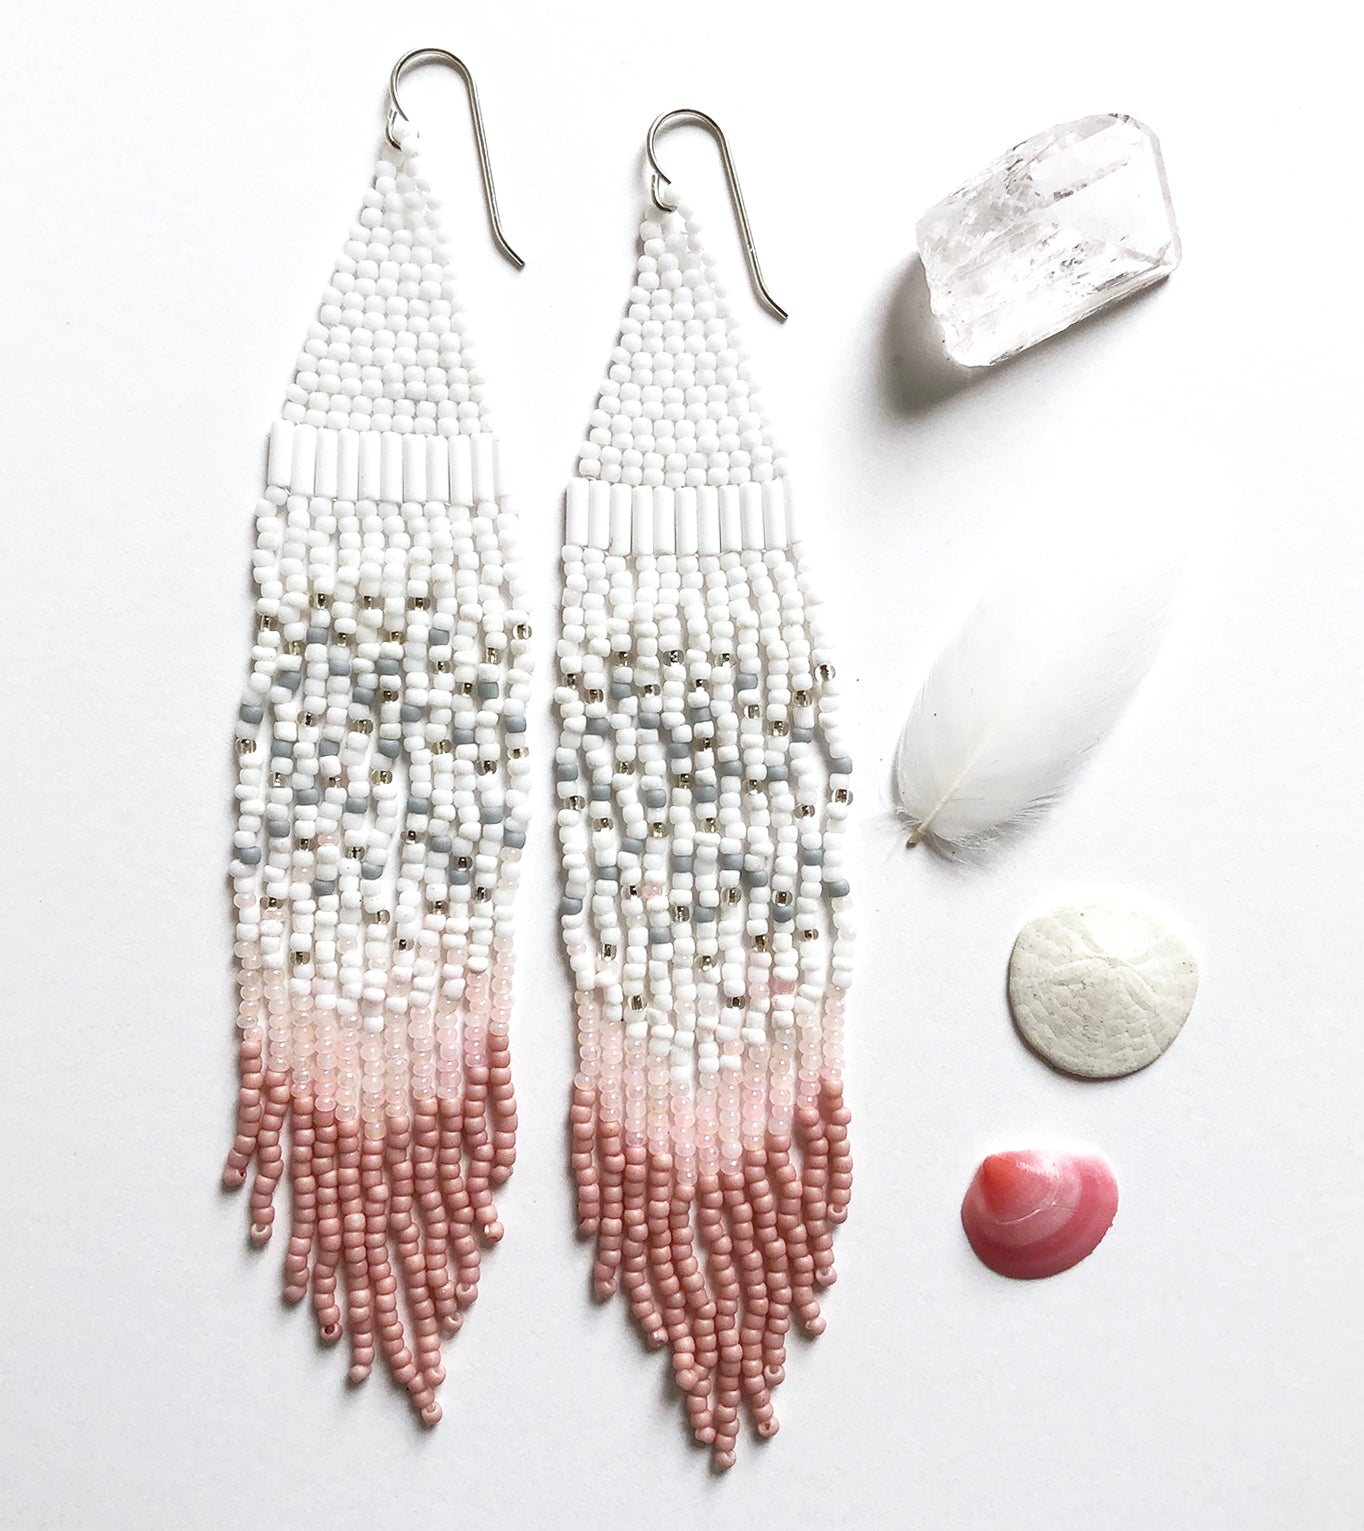 Extra long Handmade Seed Bead Fringe Earrings - blush pink, white and silver vintage beads combined with matte gray and pink